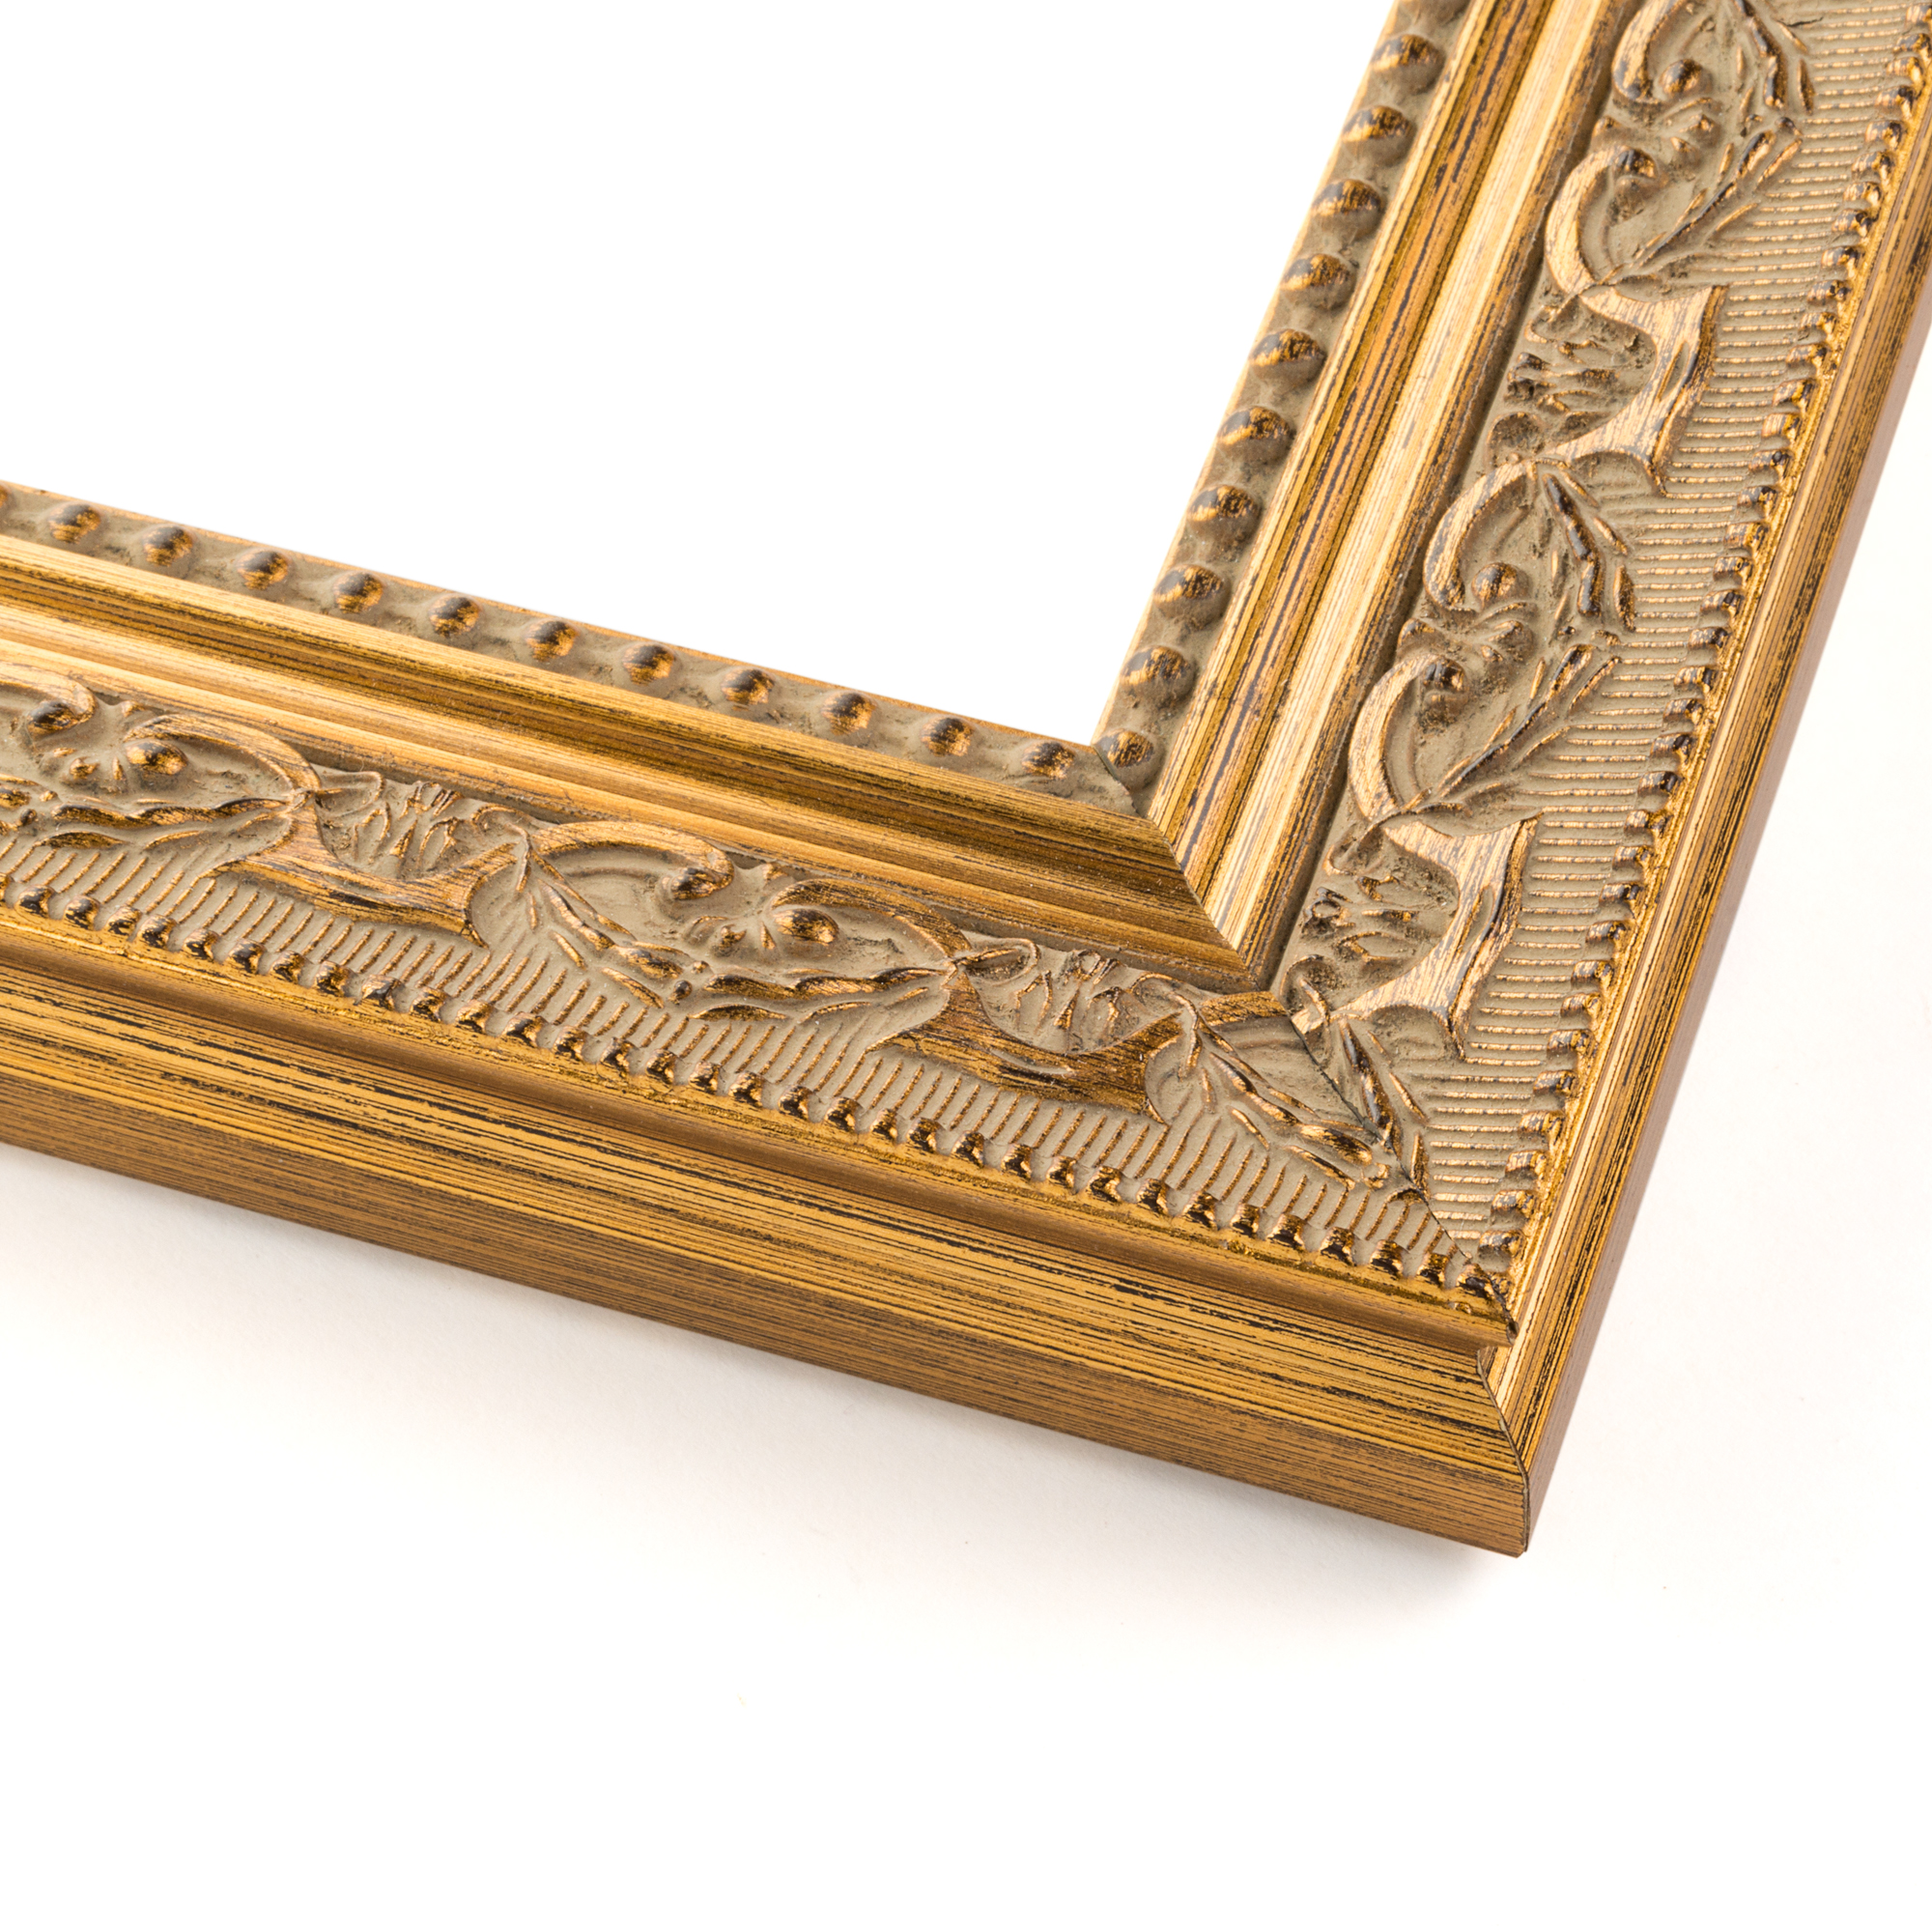 CustomPictureFrames.com 6x6 - 6 x 6 Antique Gold Solid Wood Frame with UV Framer's Acrylic & Foam Board Backing - Great for A Photo, Poster